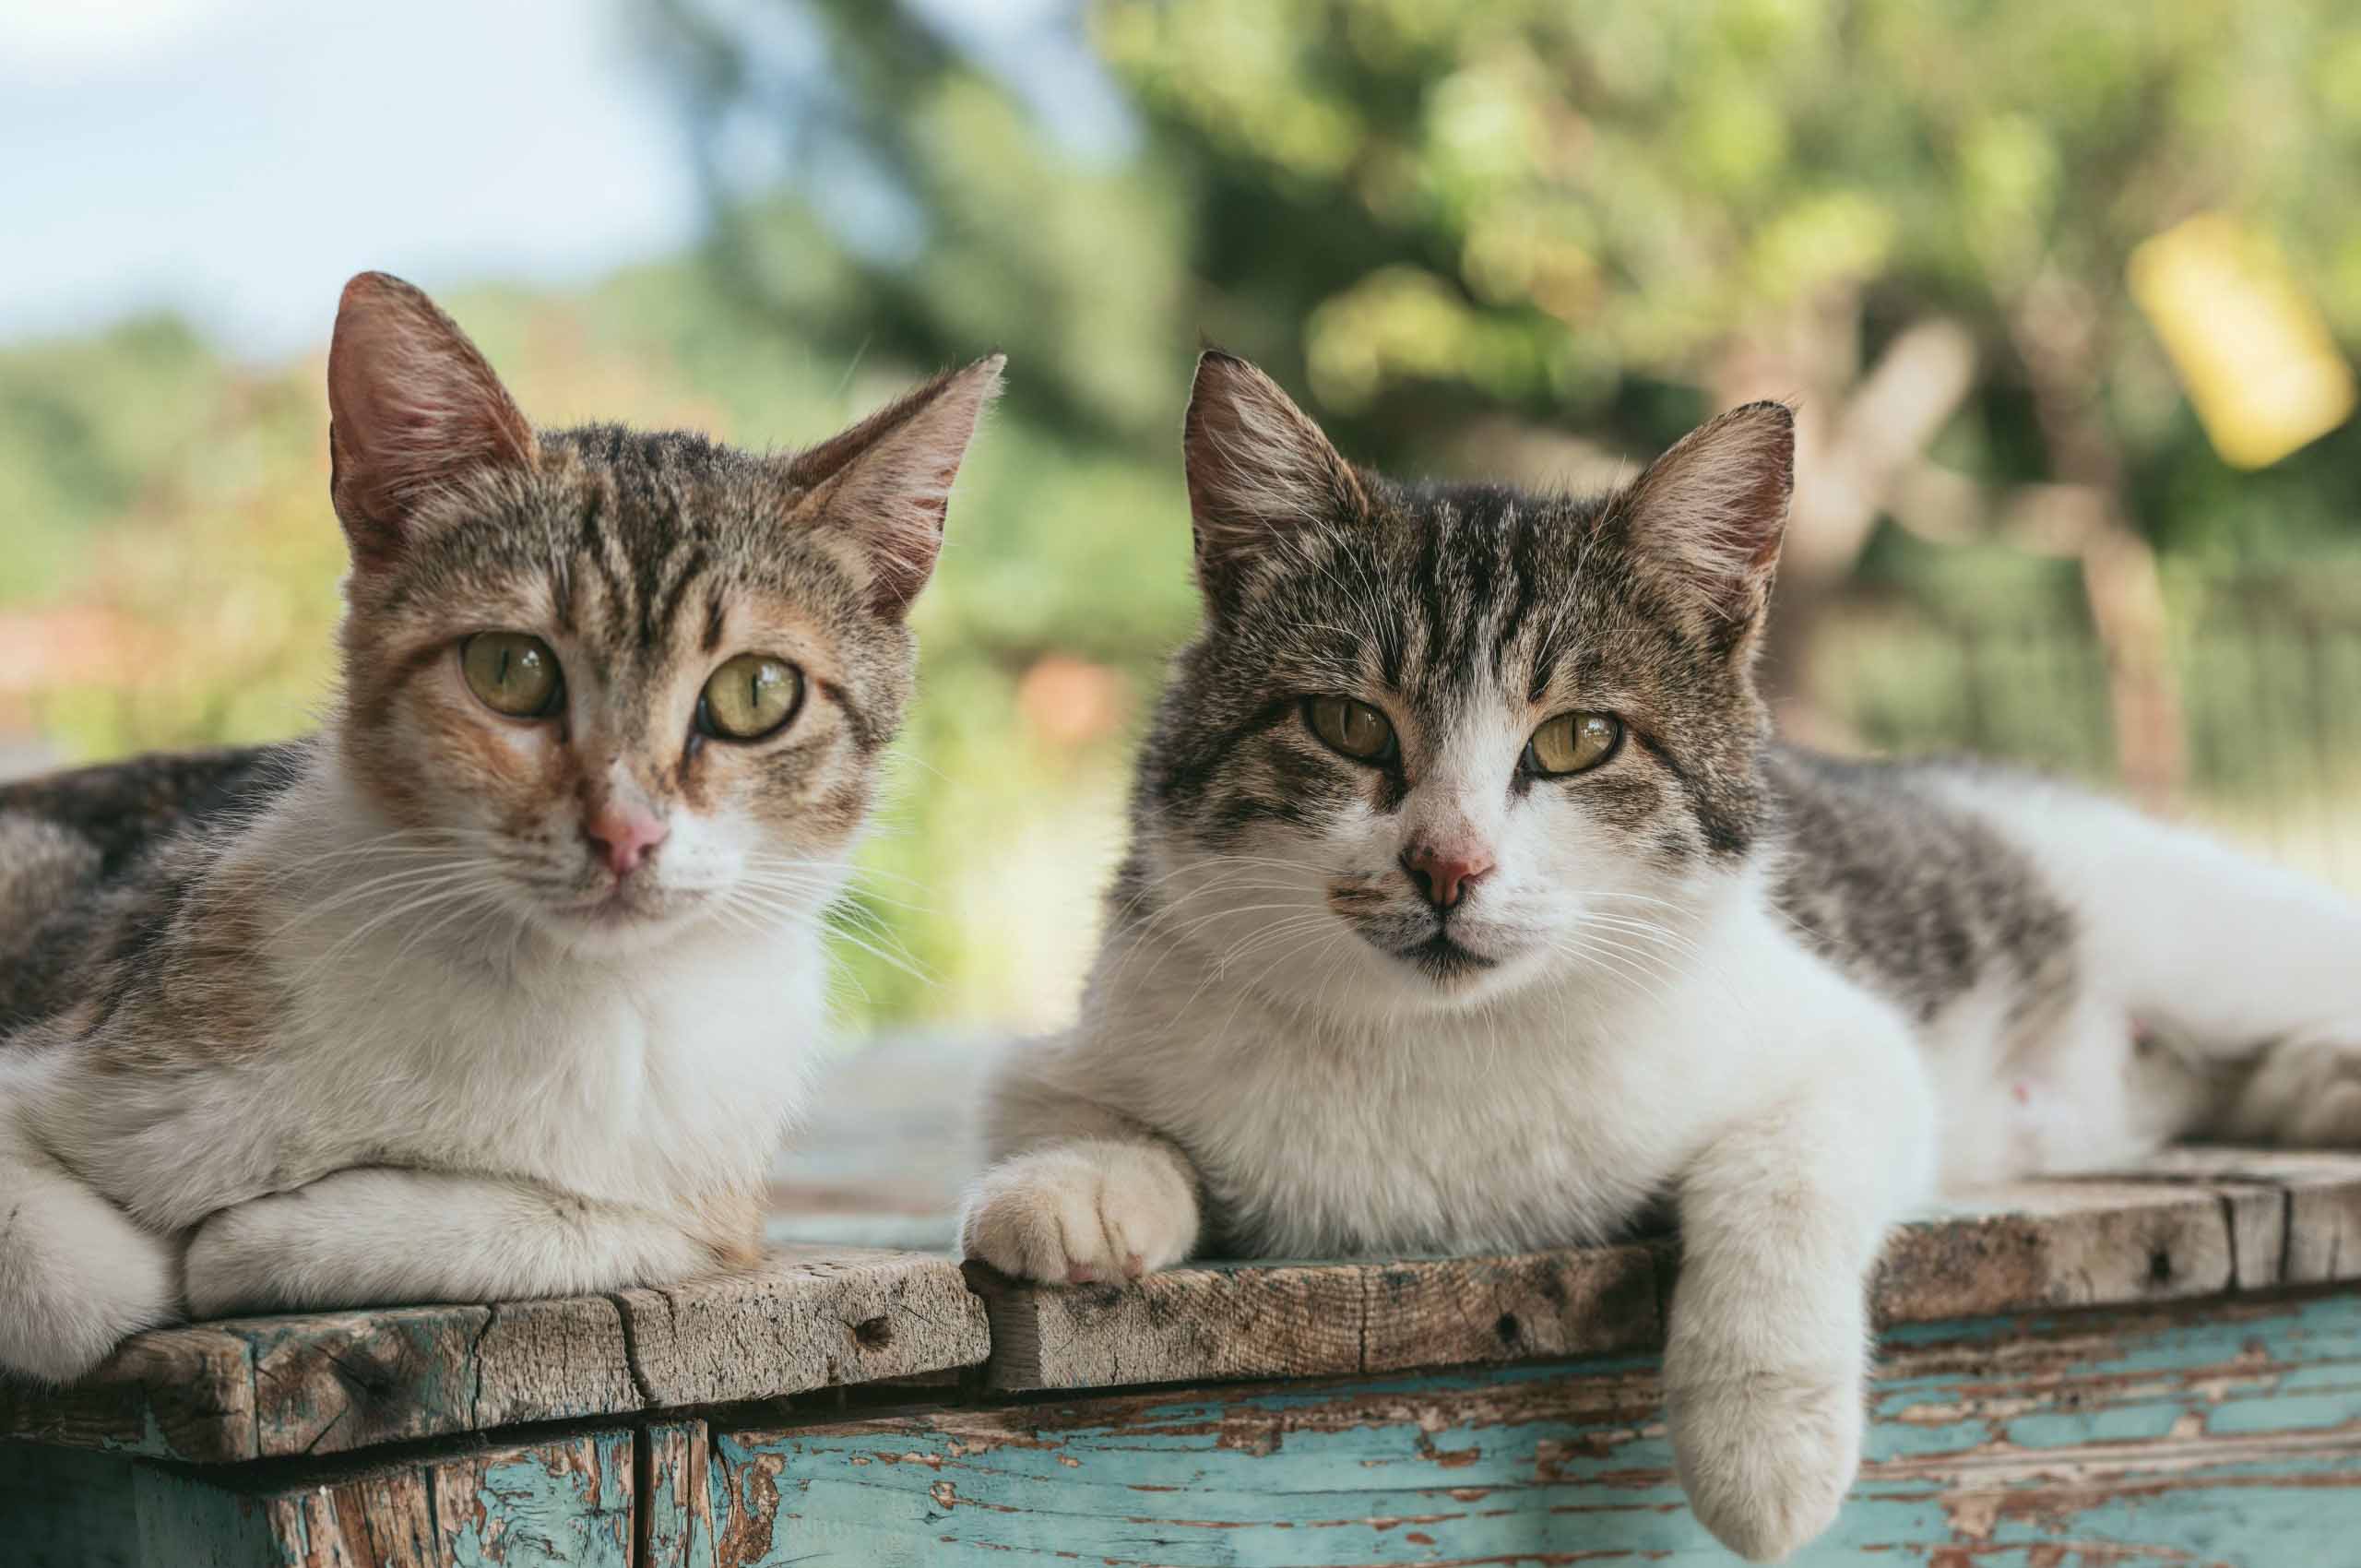 Two tabby cats on fence.